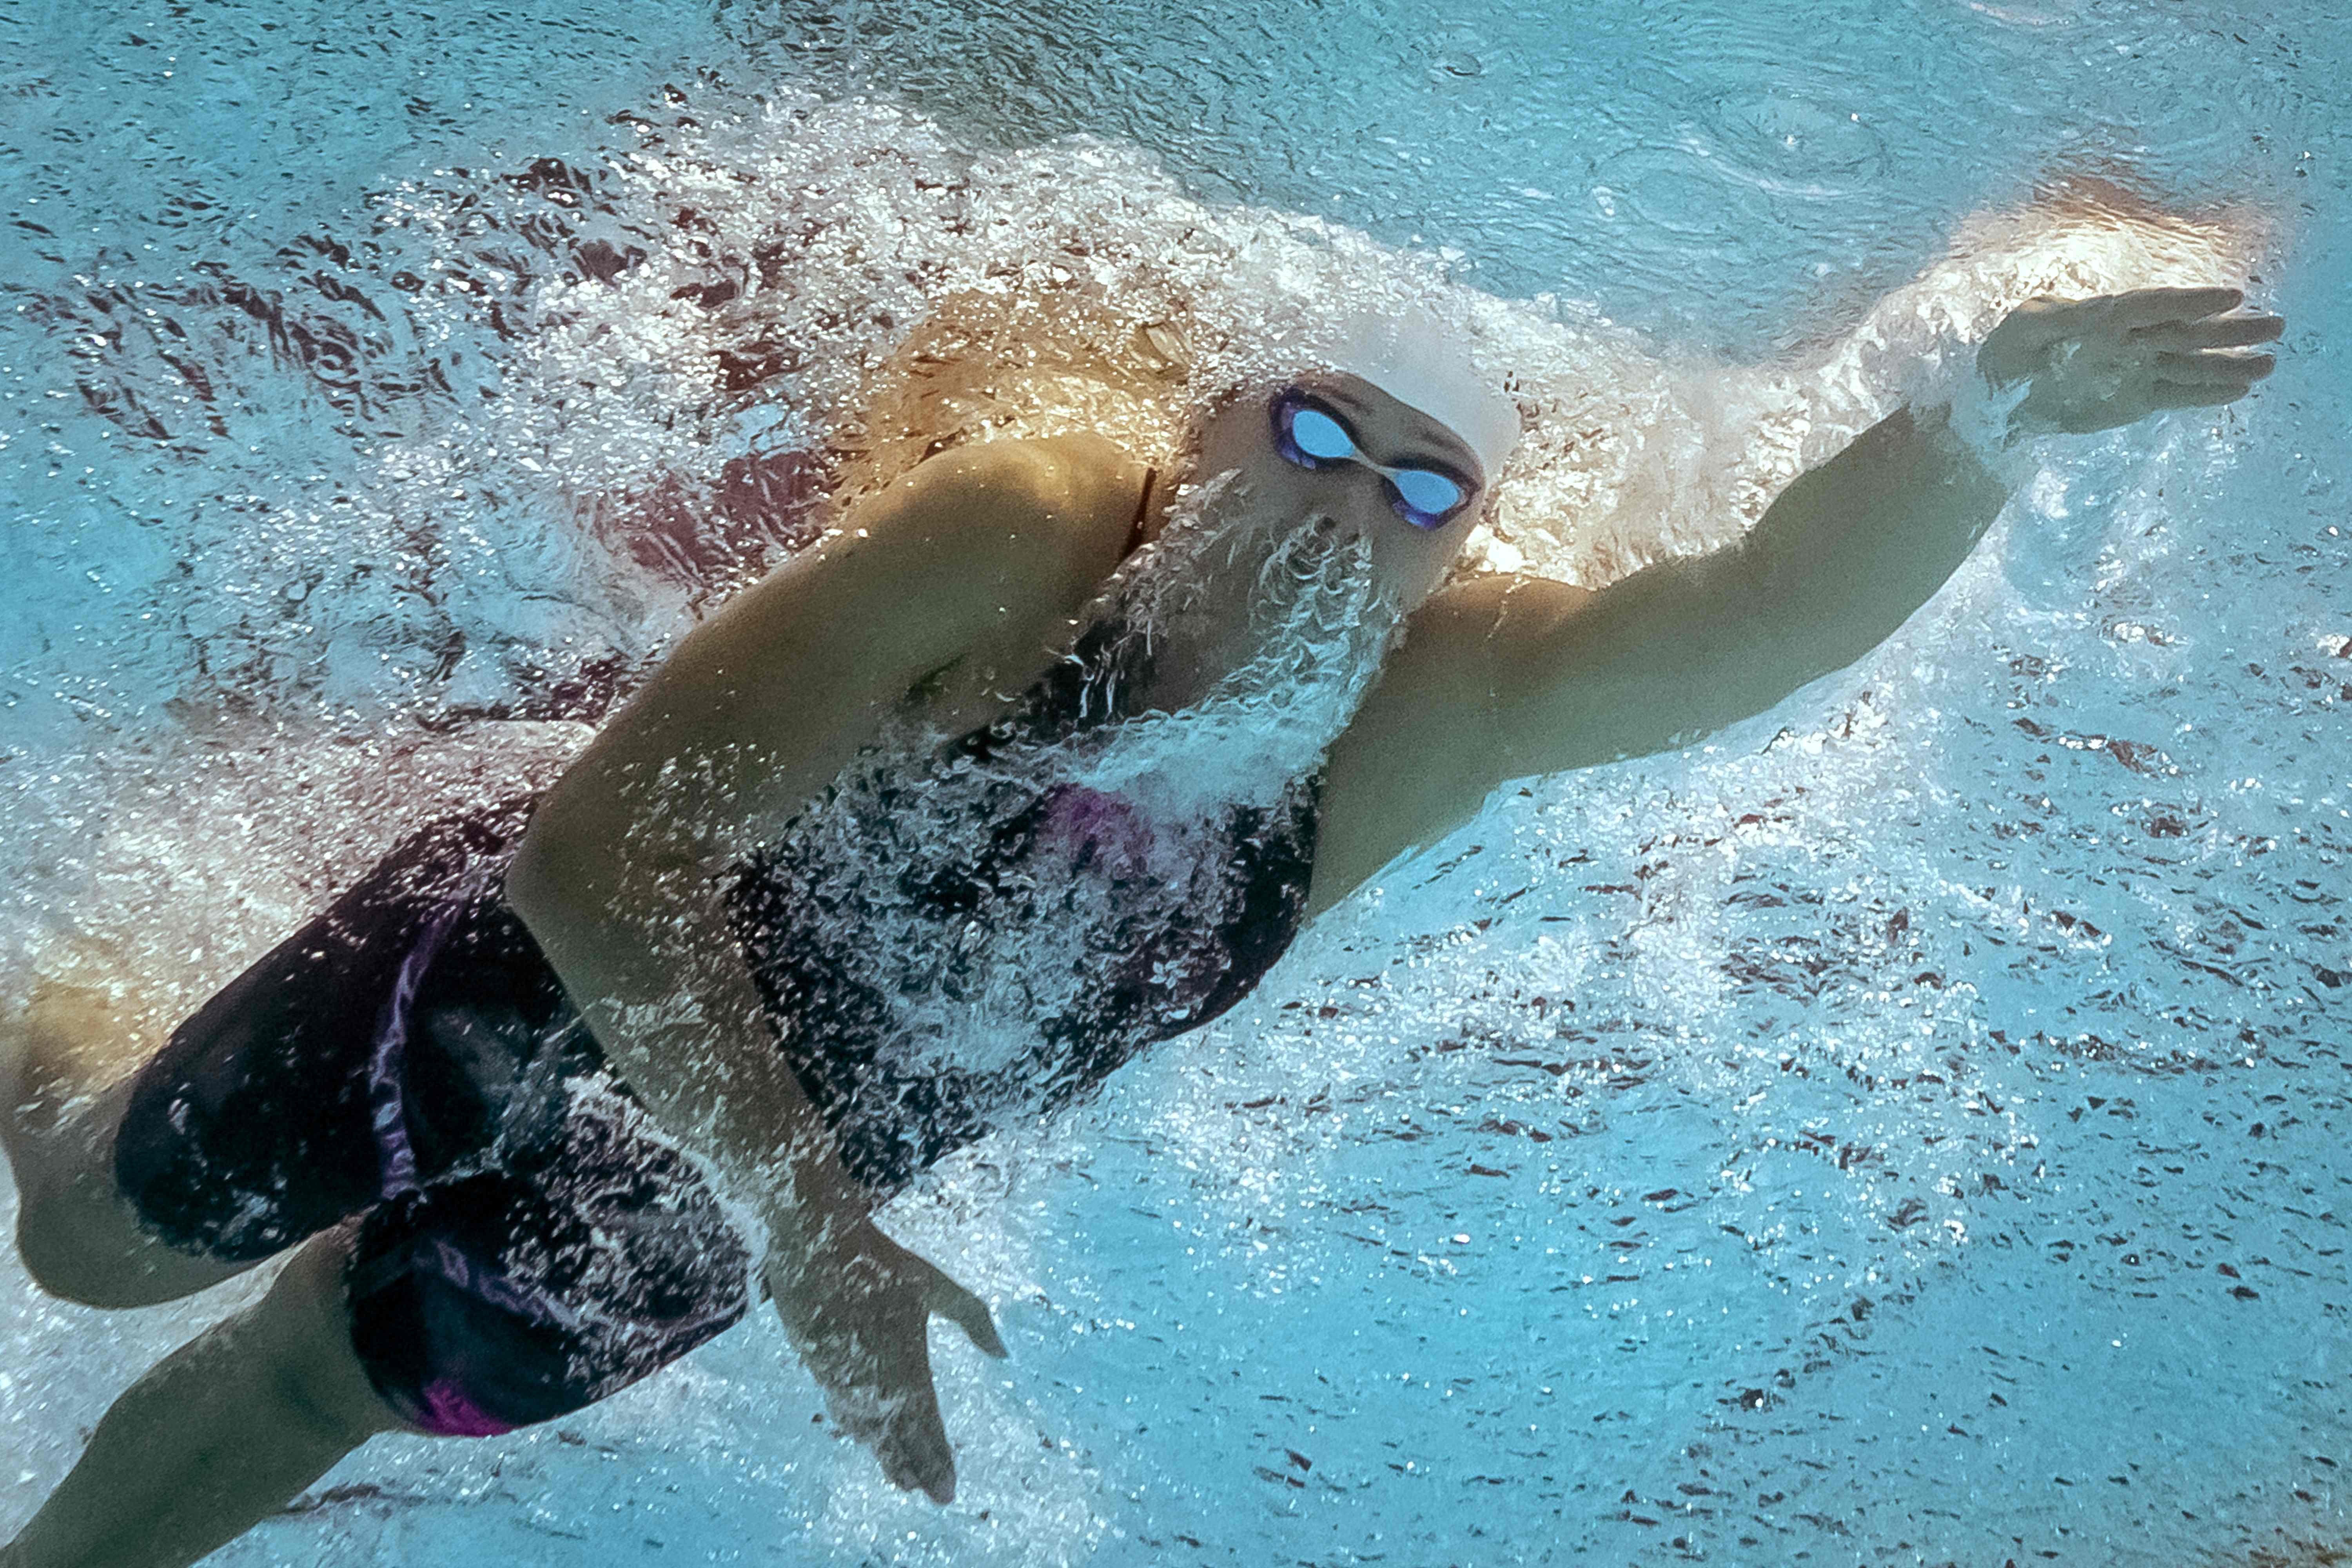 Siobhan Haughey competes at the 2019 World Championships in Gwangju, South Korea. She is one of the two Hong Kong swimmers who have reached the Tokyo Olympics qualification standard. Photo: AFP